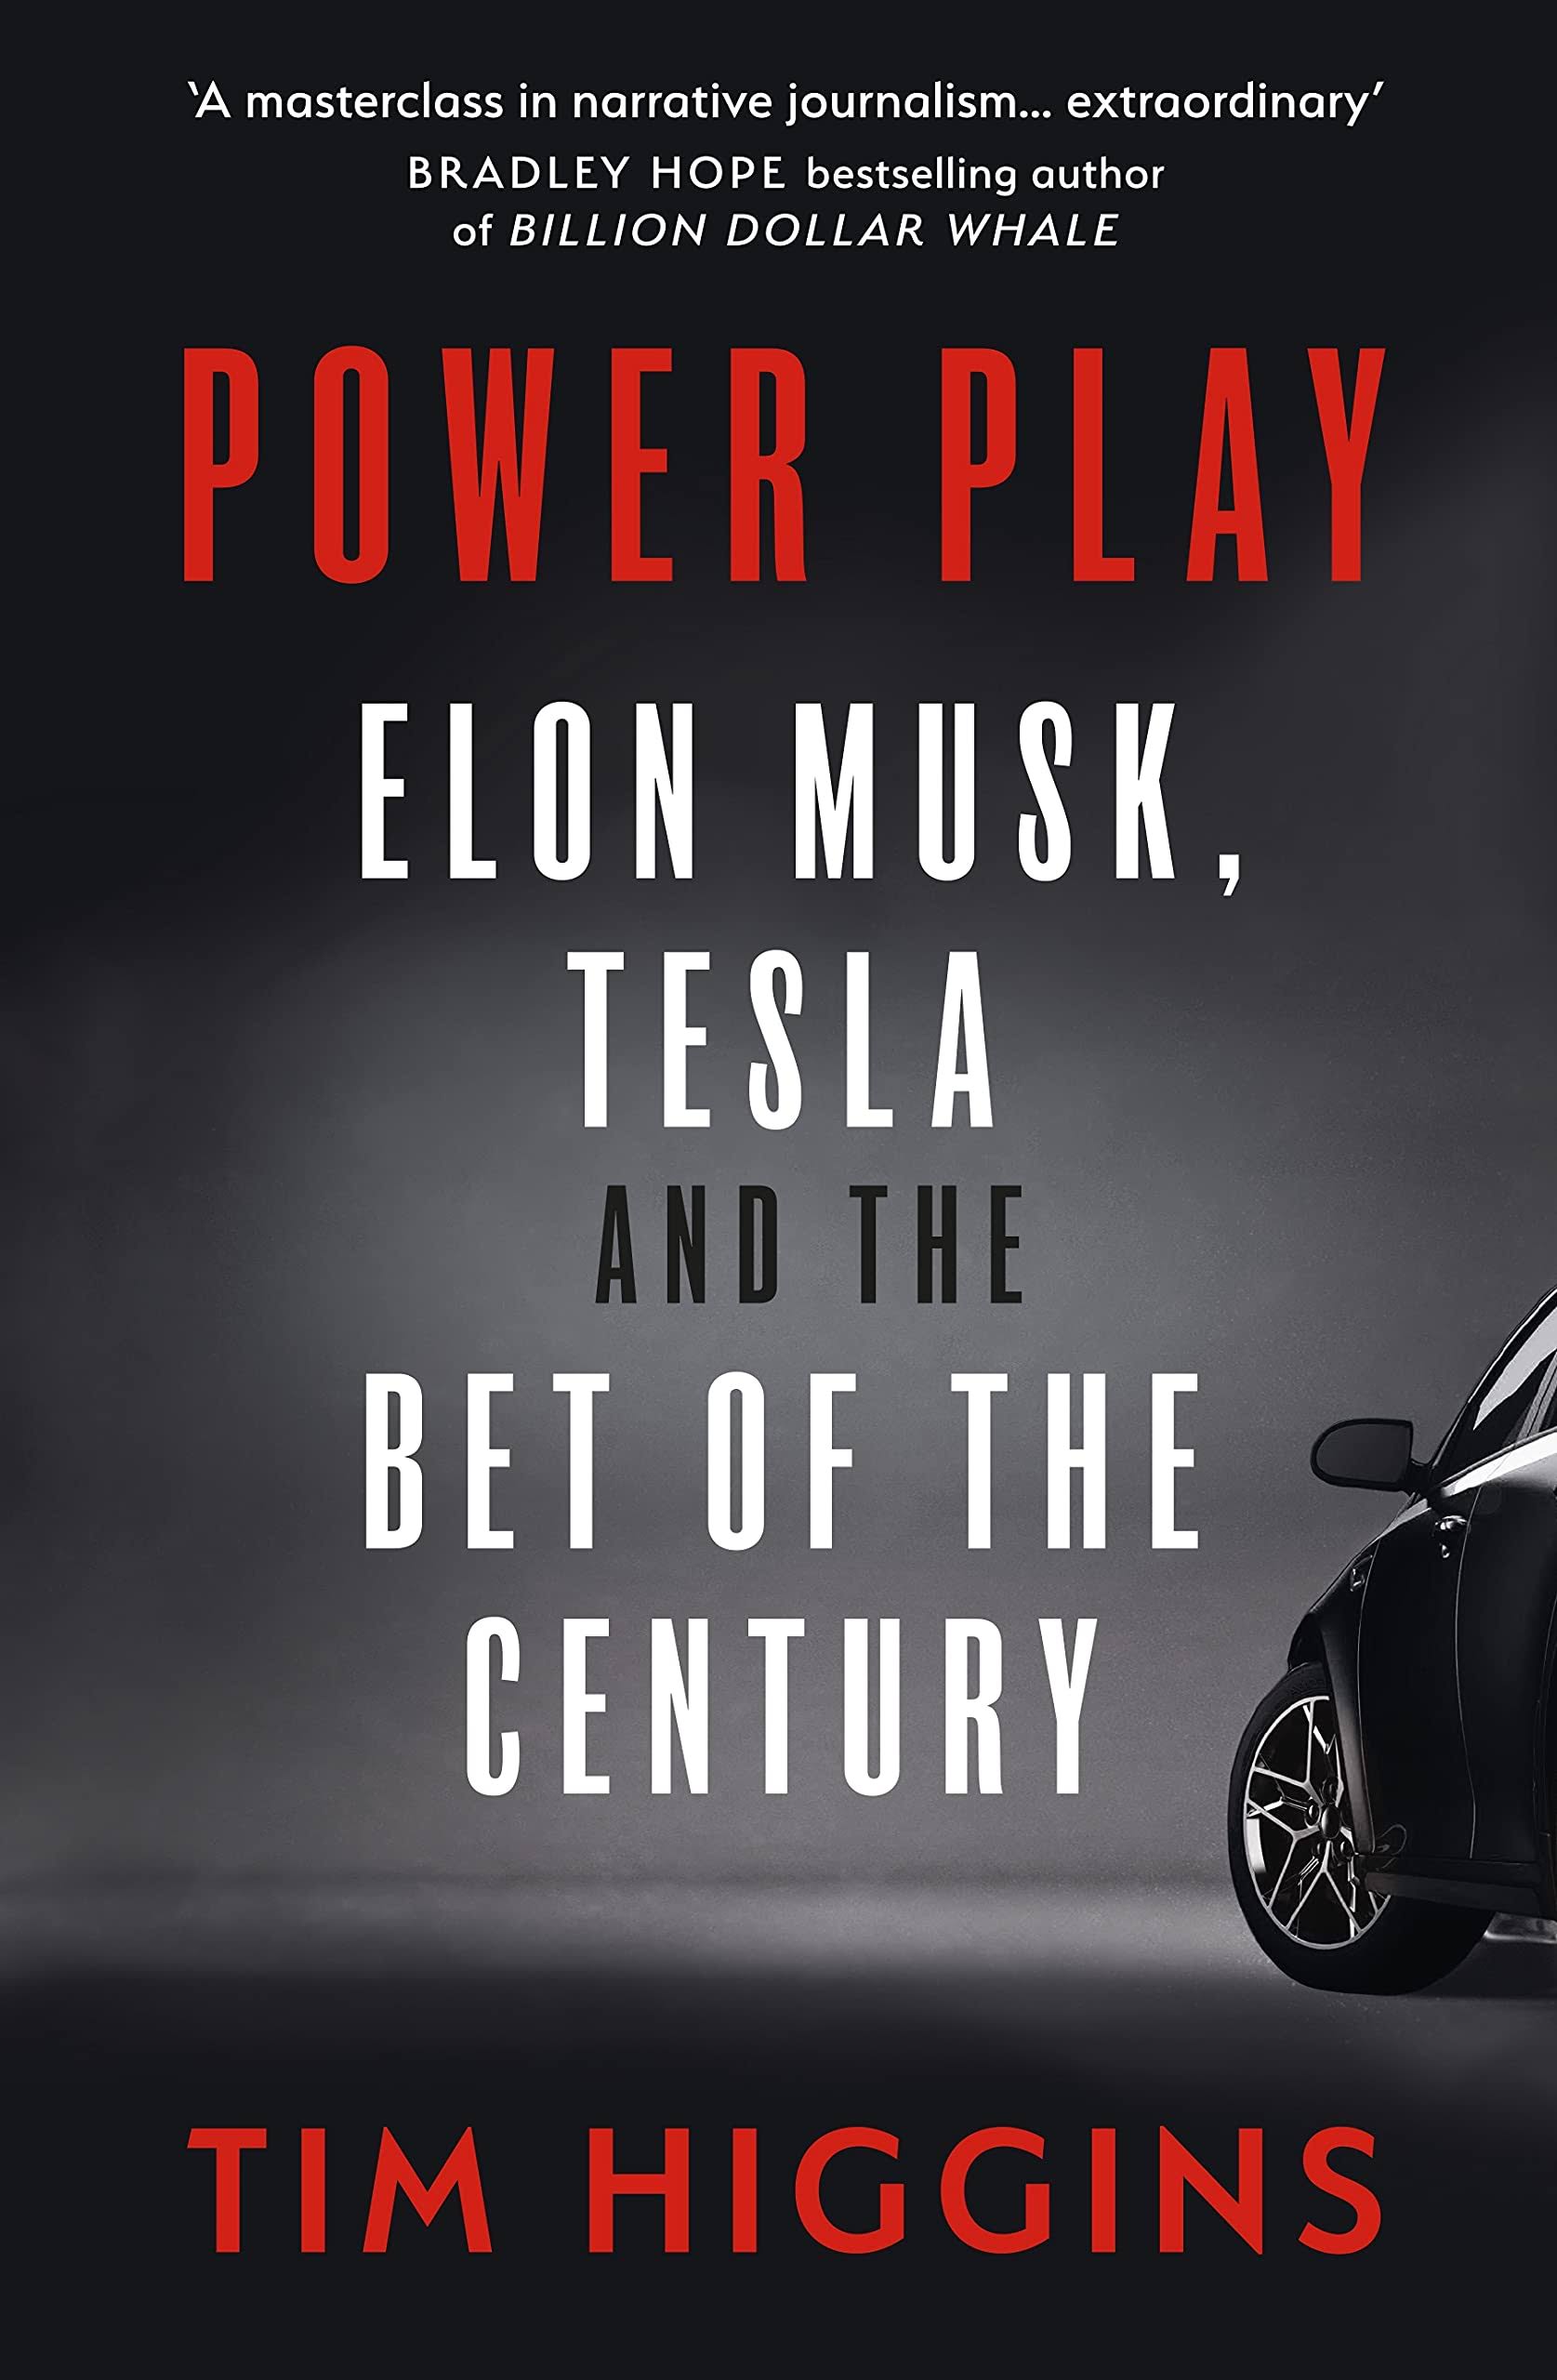 Power Play: Elon Musk, Tesla, and the Bet of the Century [Book]